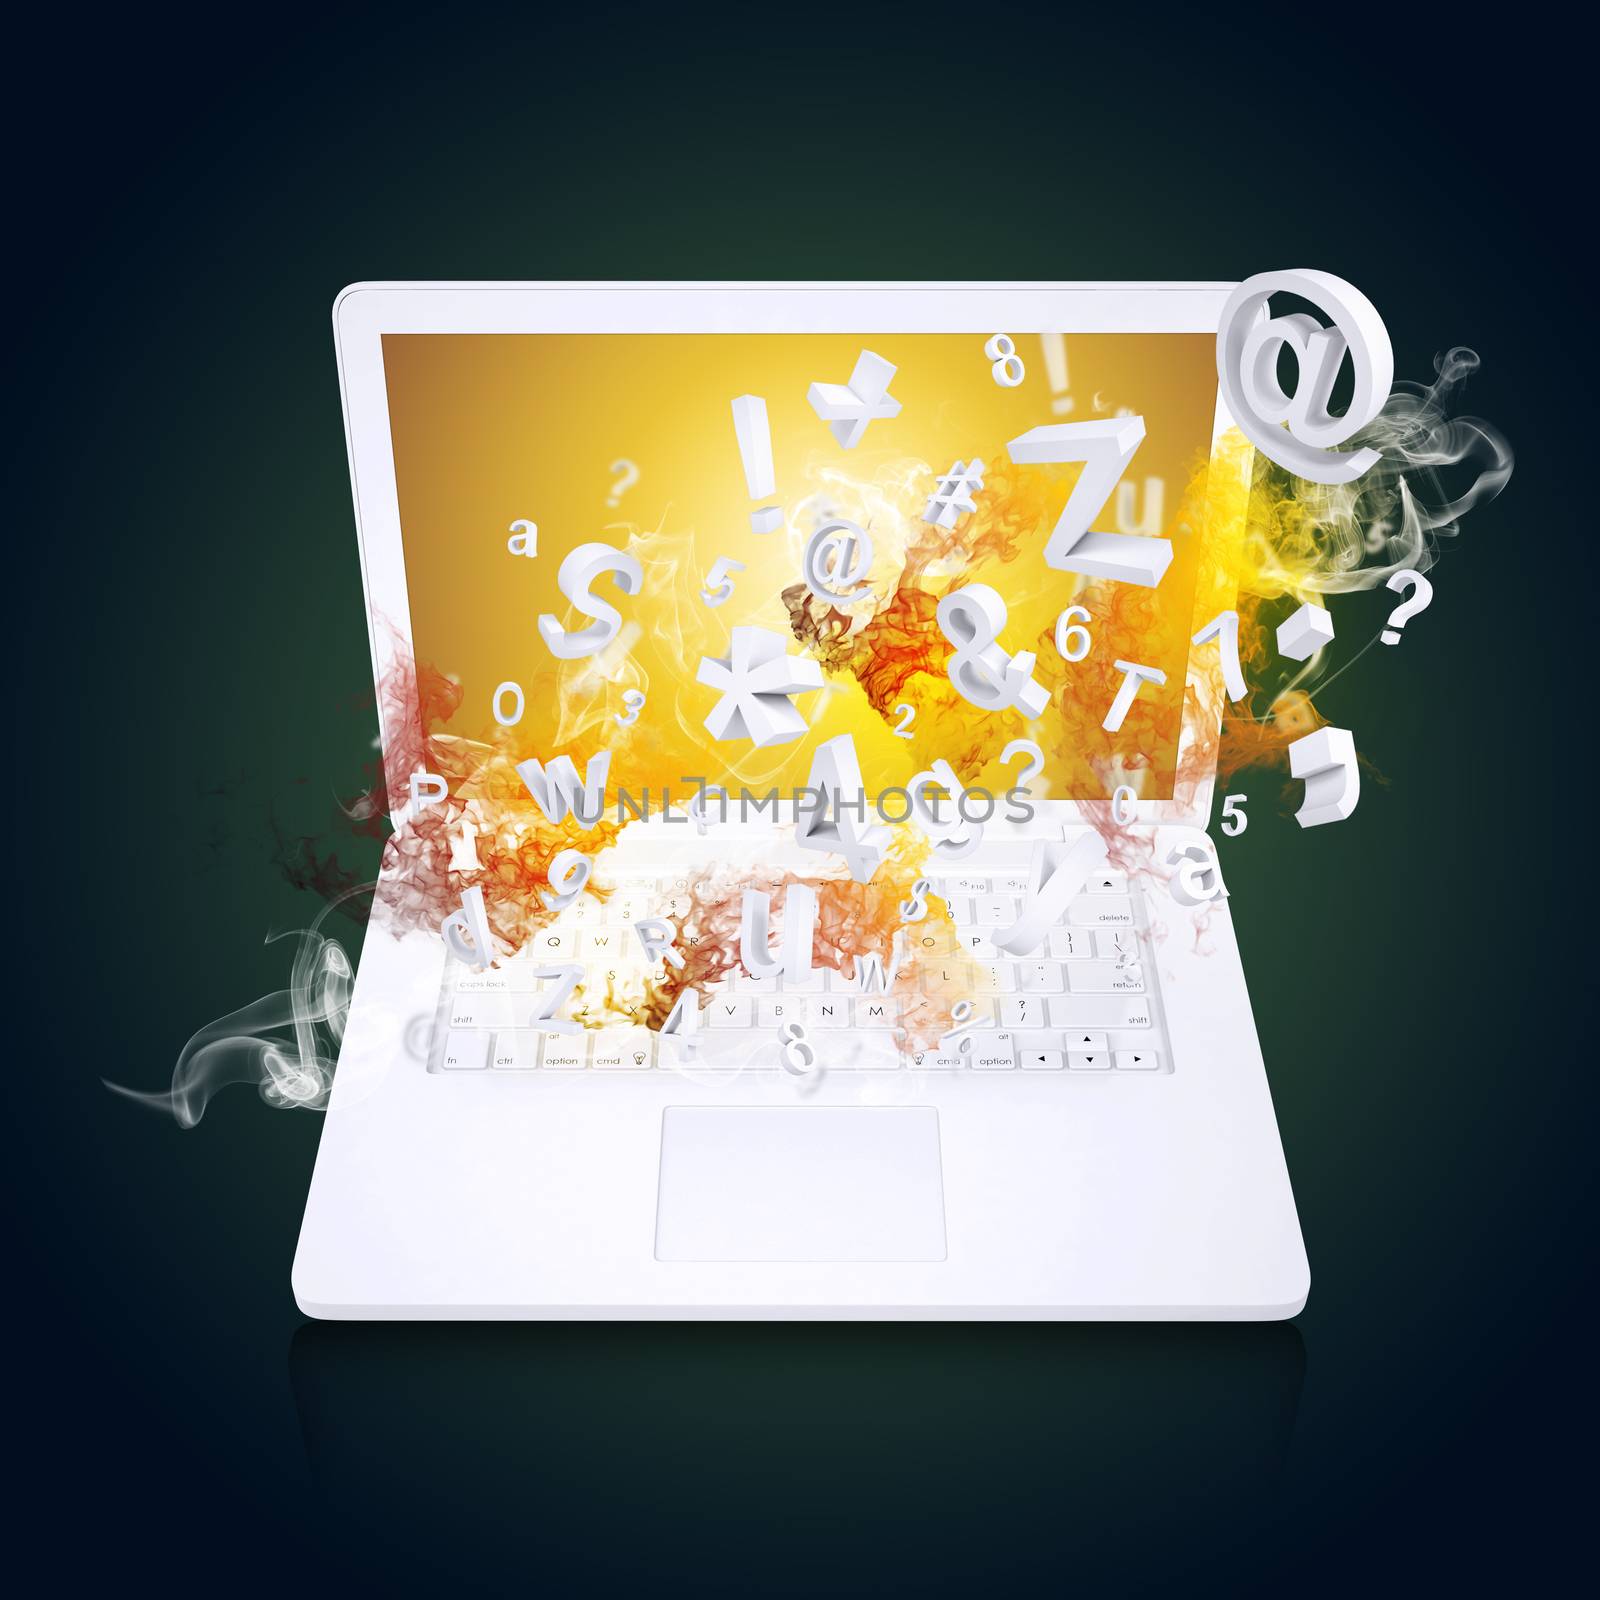 Laptop emits letters, numbers and colored smoke. Technology concept